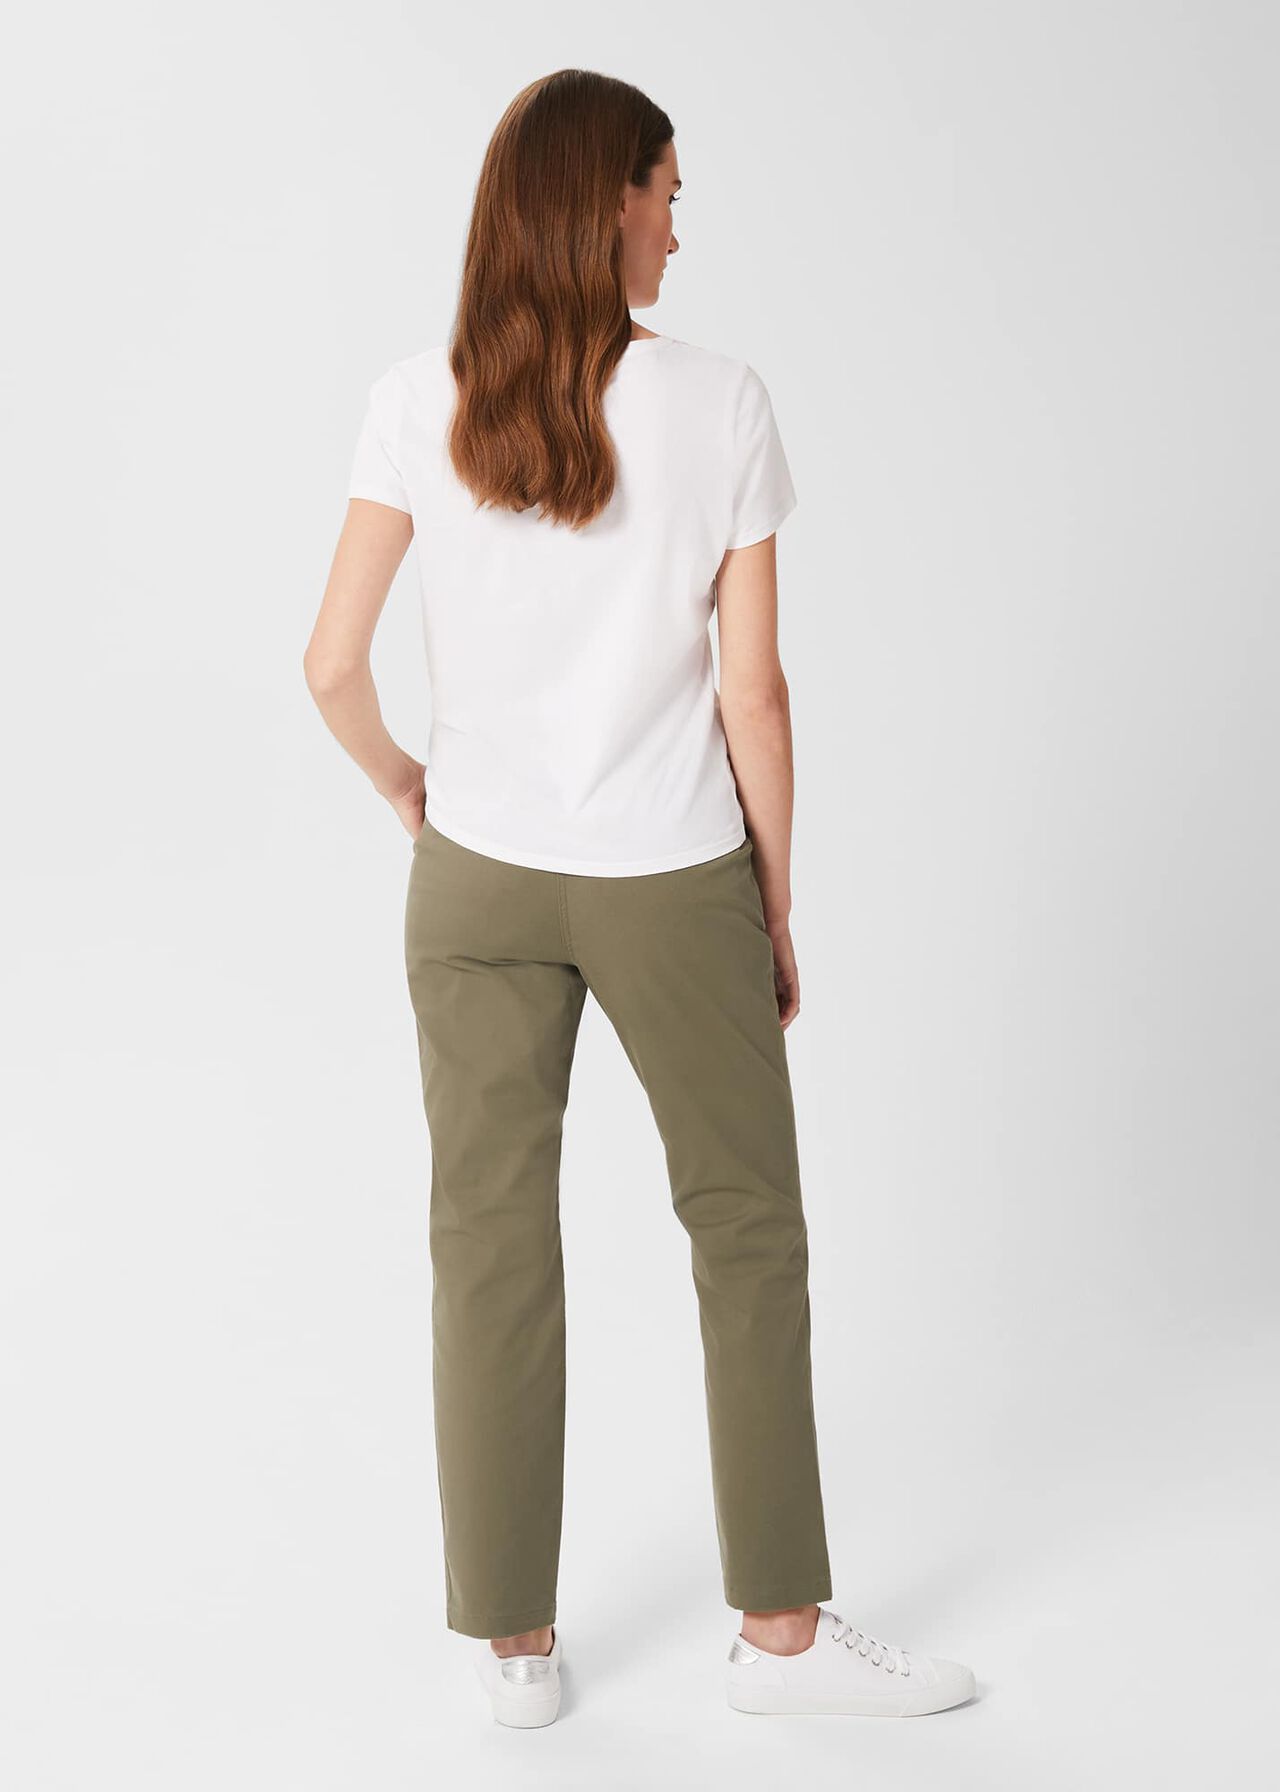 Women's ladies classic Gap beige khakis chinos pants 100% cotton 8 -  clothing & accessories - by owner - apparel sale